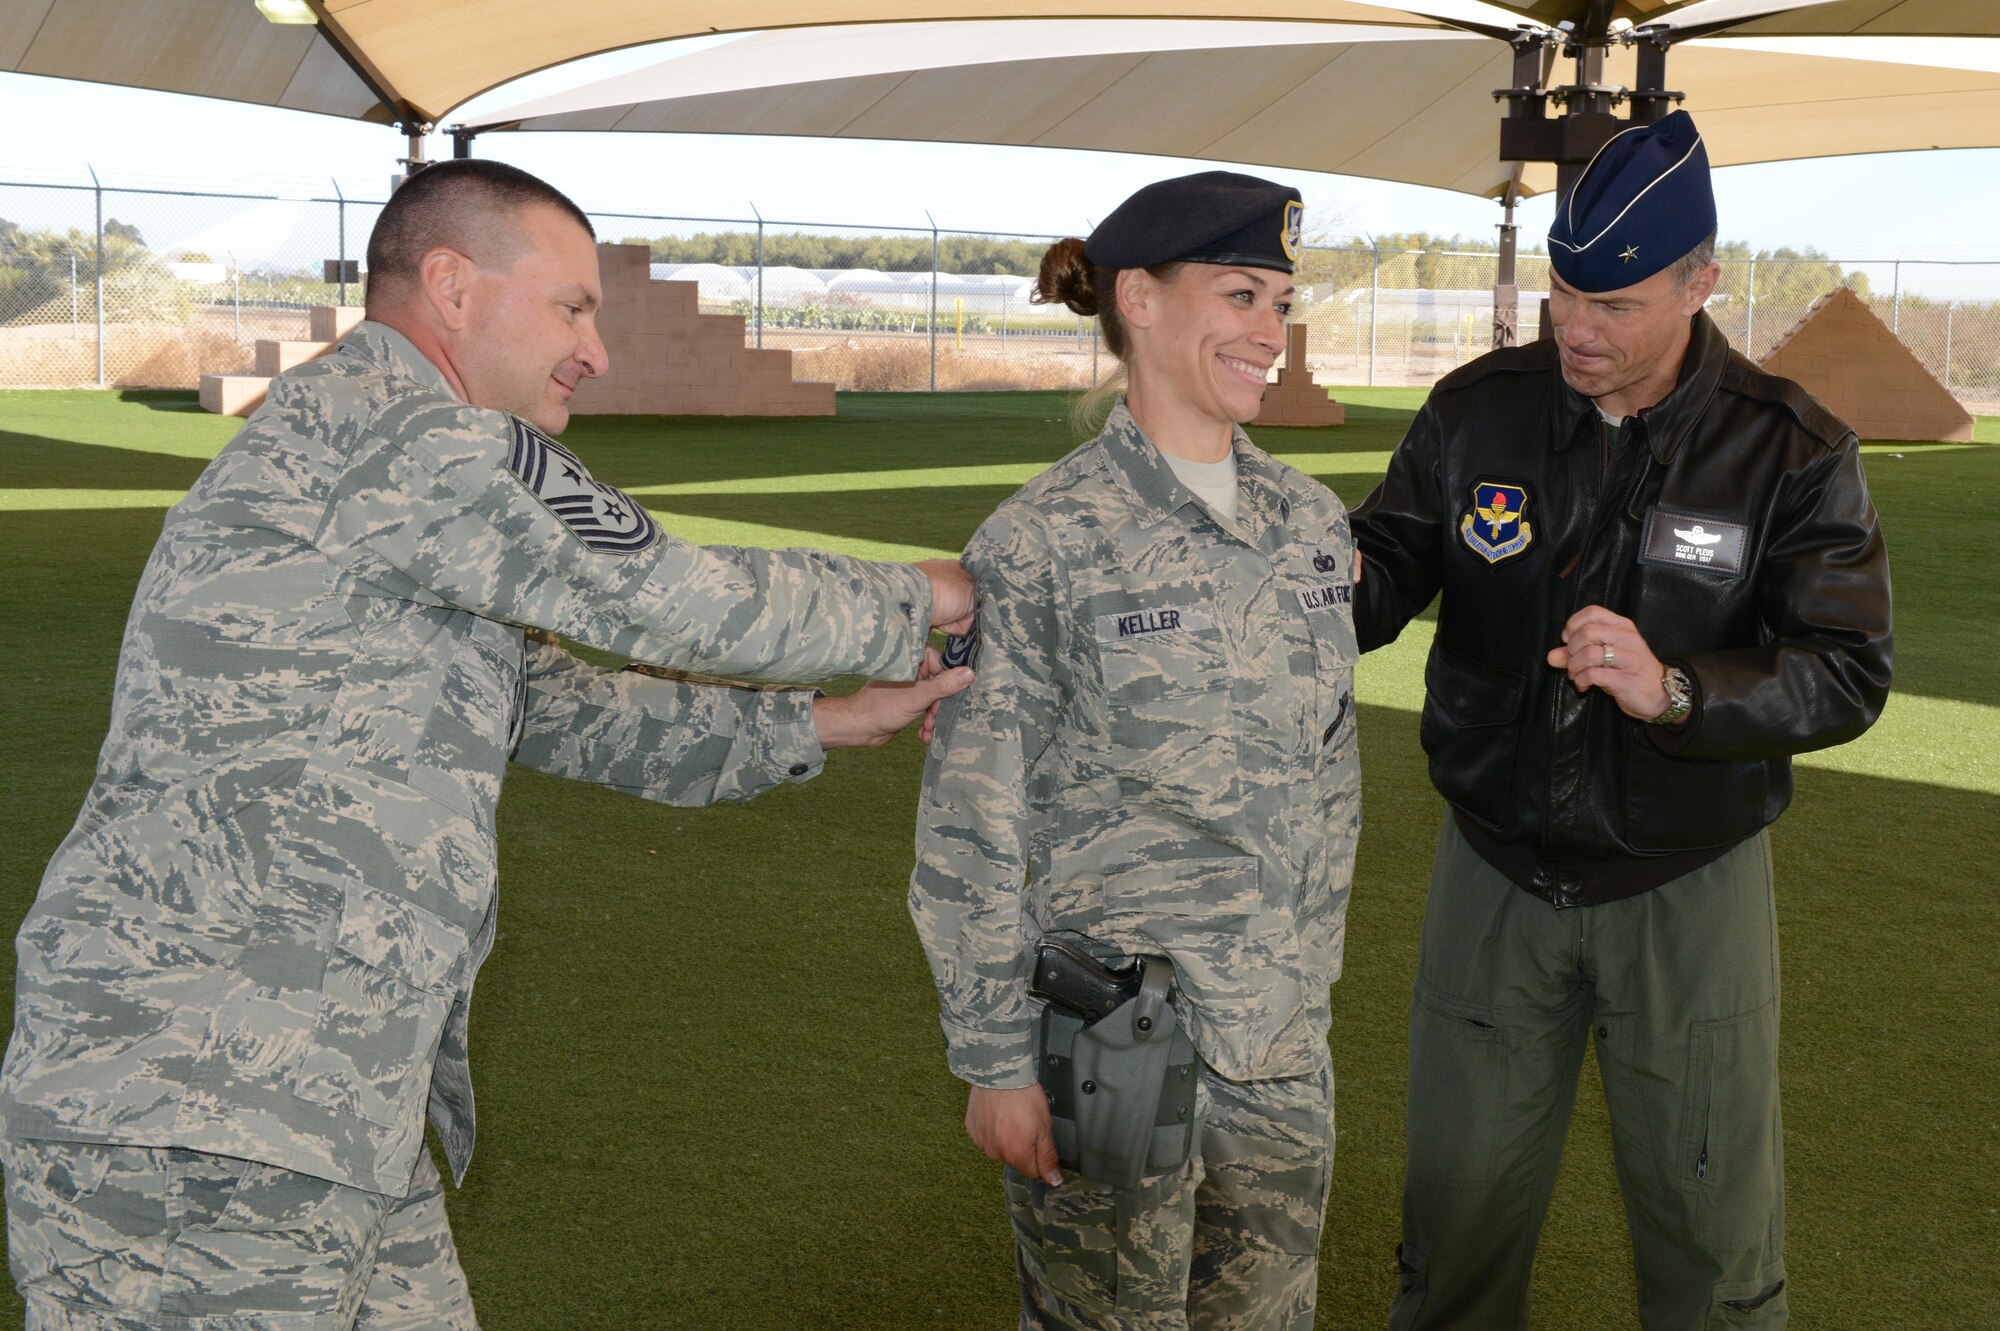 Staff Sgt. Jessica Keller, 56th Security Forces Squadron military working dog handler, gets step promoted by Gen. Scott Pleus, 56th Fighter Wing commander, and Chief Master Sgt. John Mazza, 56th FW command chief, at Luke Air Force Base, Arizona, Dec. 28, 2015. 